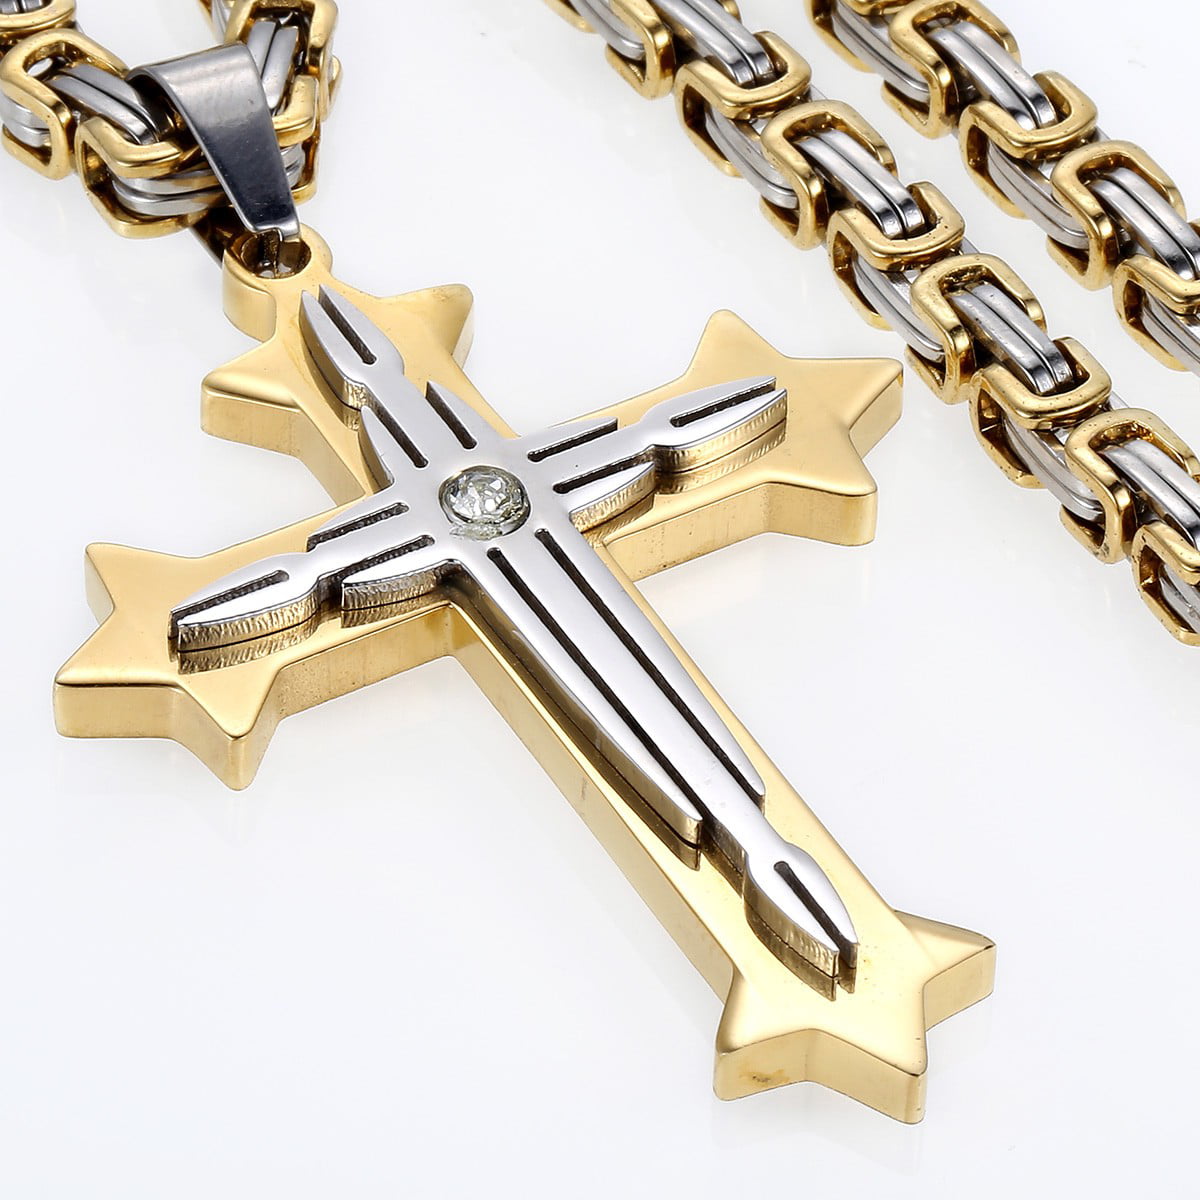 5mm Men Chain Black Silver Byzantine Stainless Steel Cross Pendant Necklace Gift